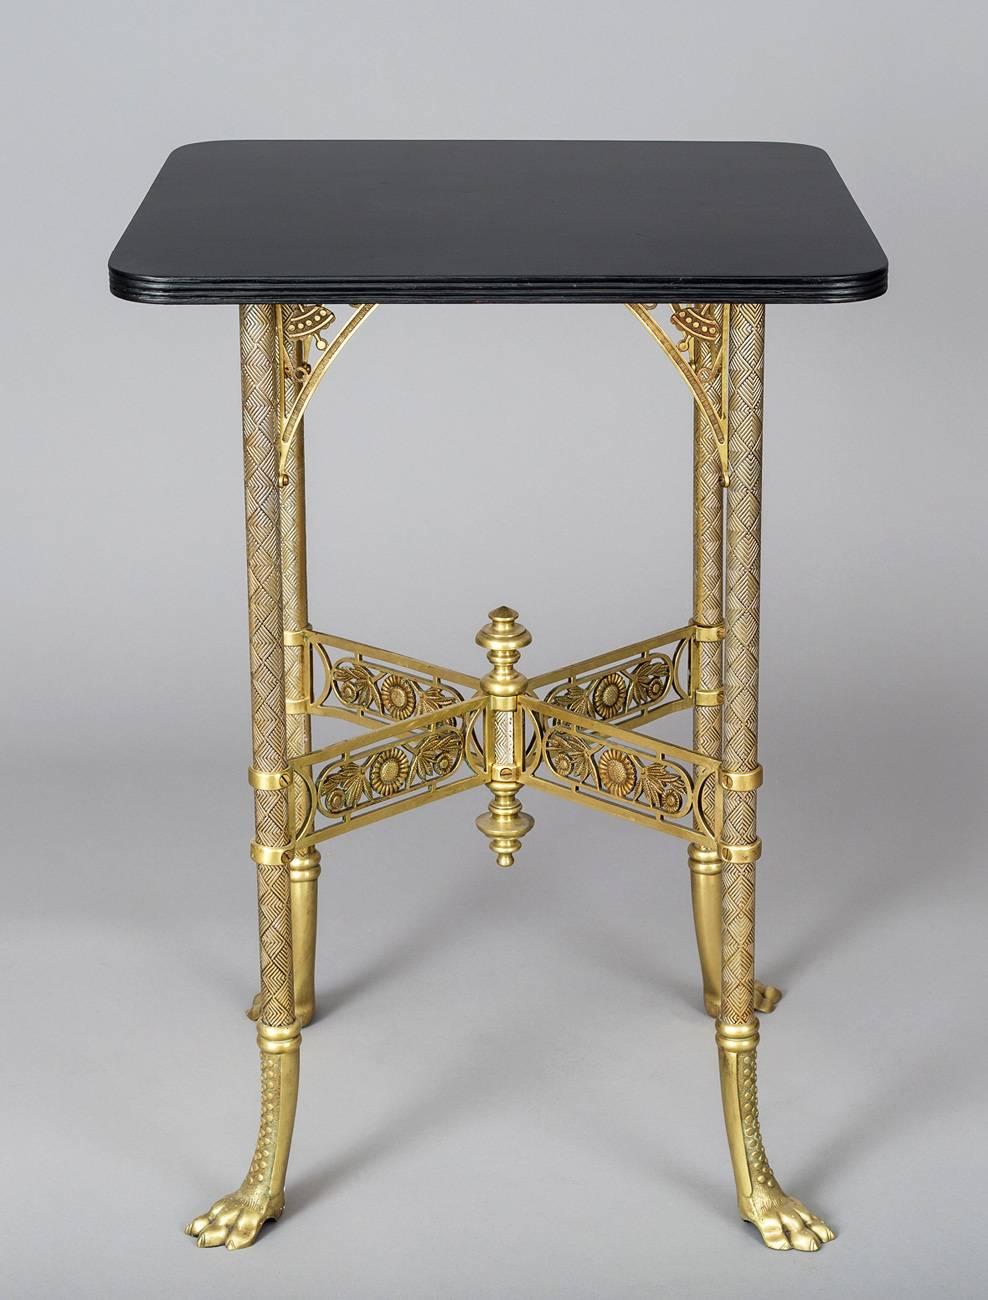 American Aesthetic Movement brass center table with lacquered ebonized top surface with reeded edge, supported by four molded brass legs decorated with diamond shapes, joined by X-shaped pierced stretchers with sunflower motif, centered by brass